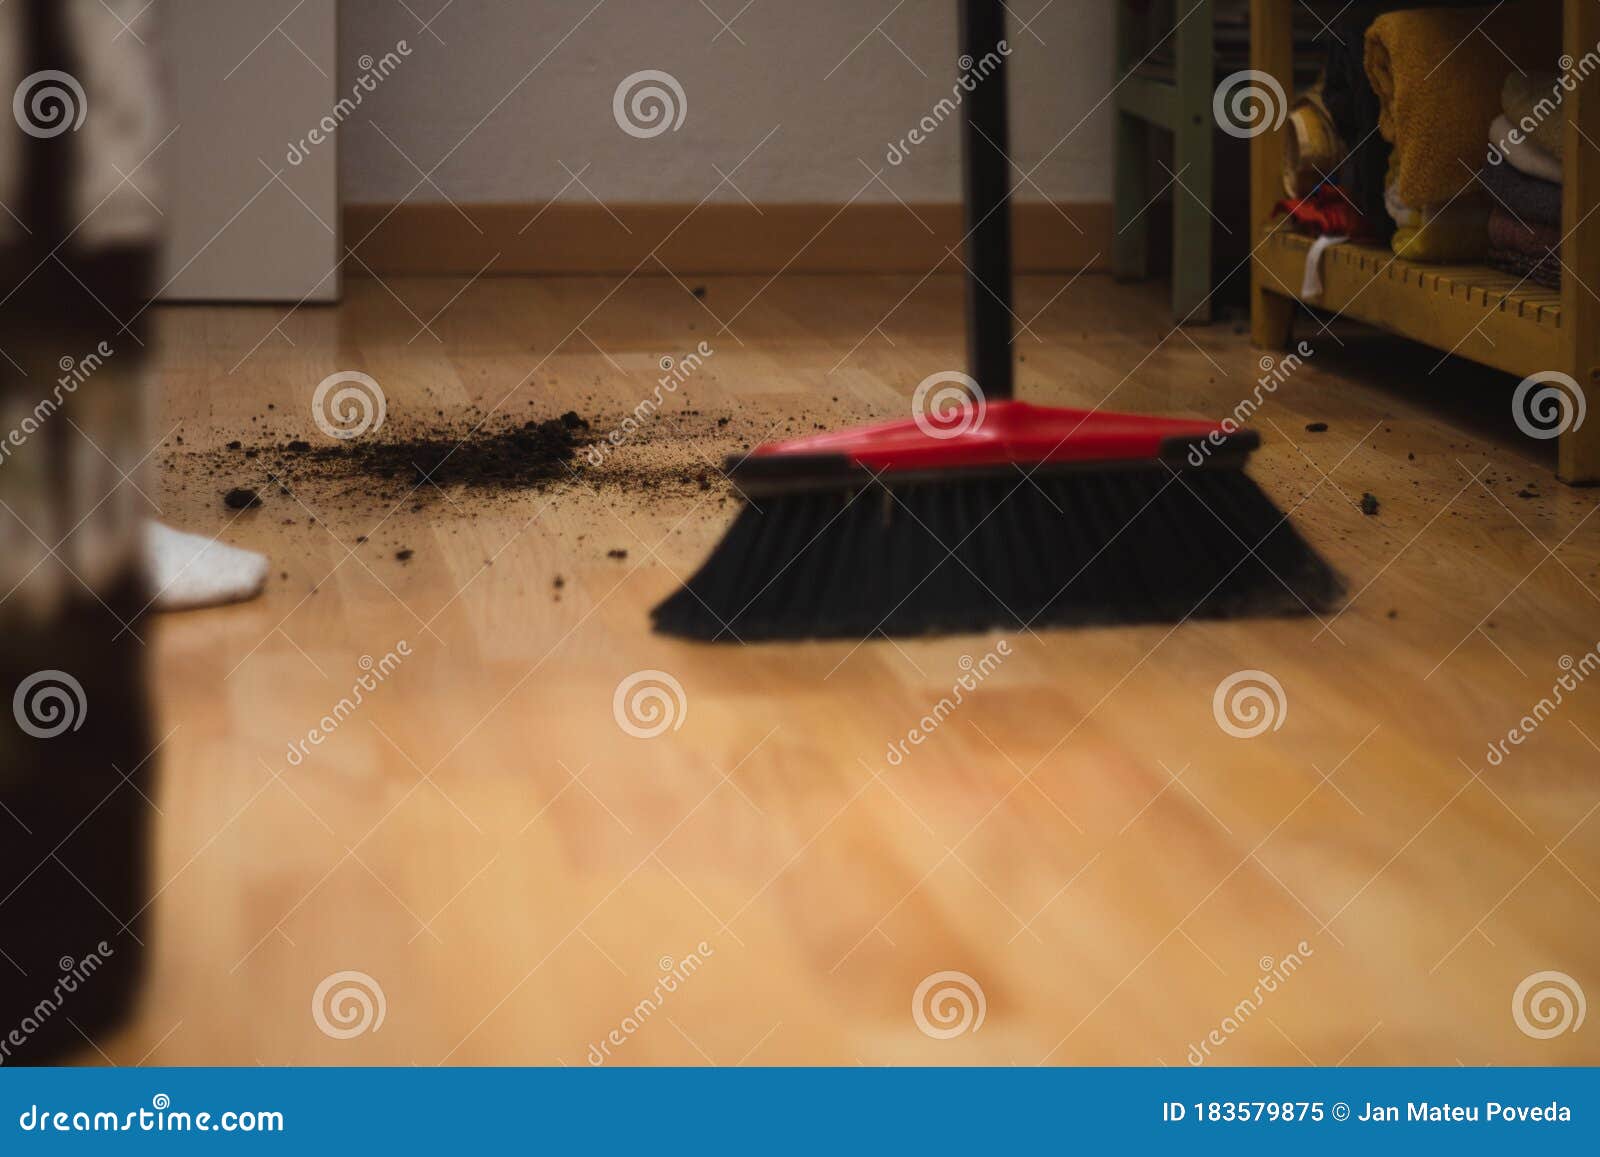 Broom Sweeping Dirt from the Ground Stock Image - Image of housework ...